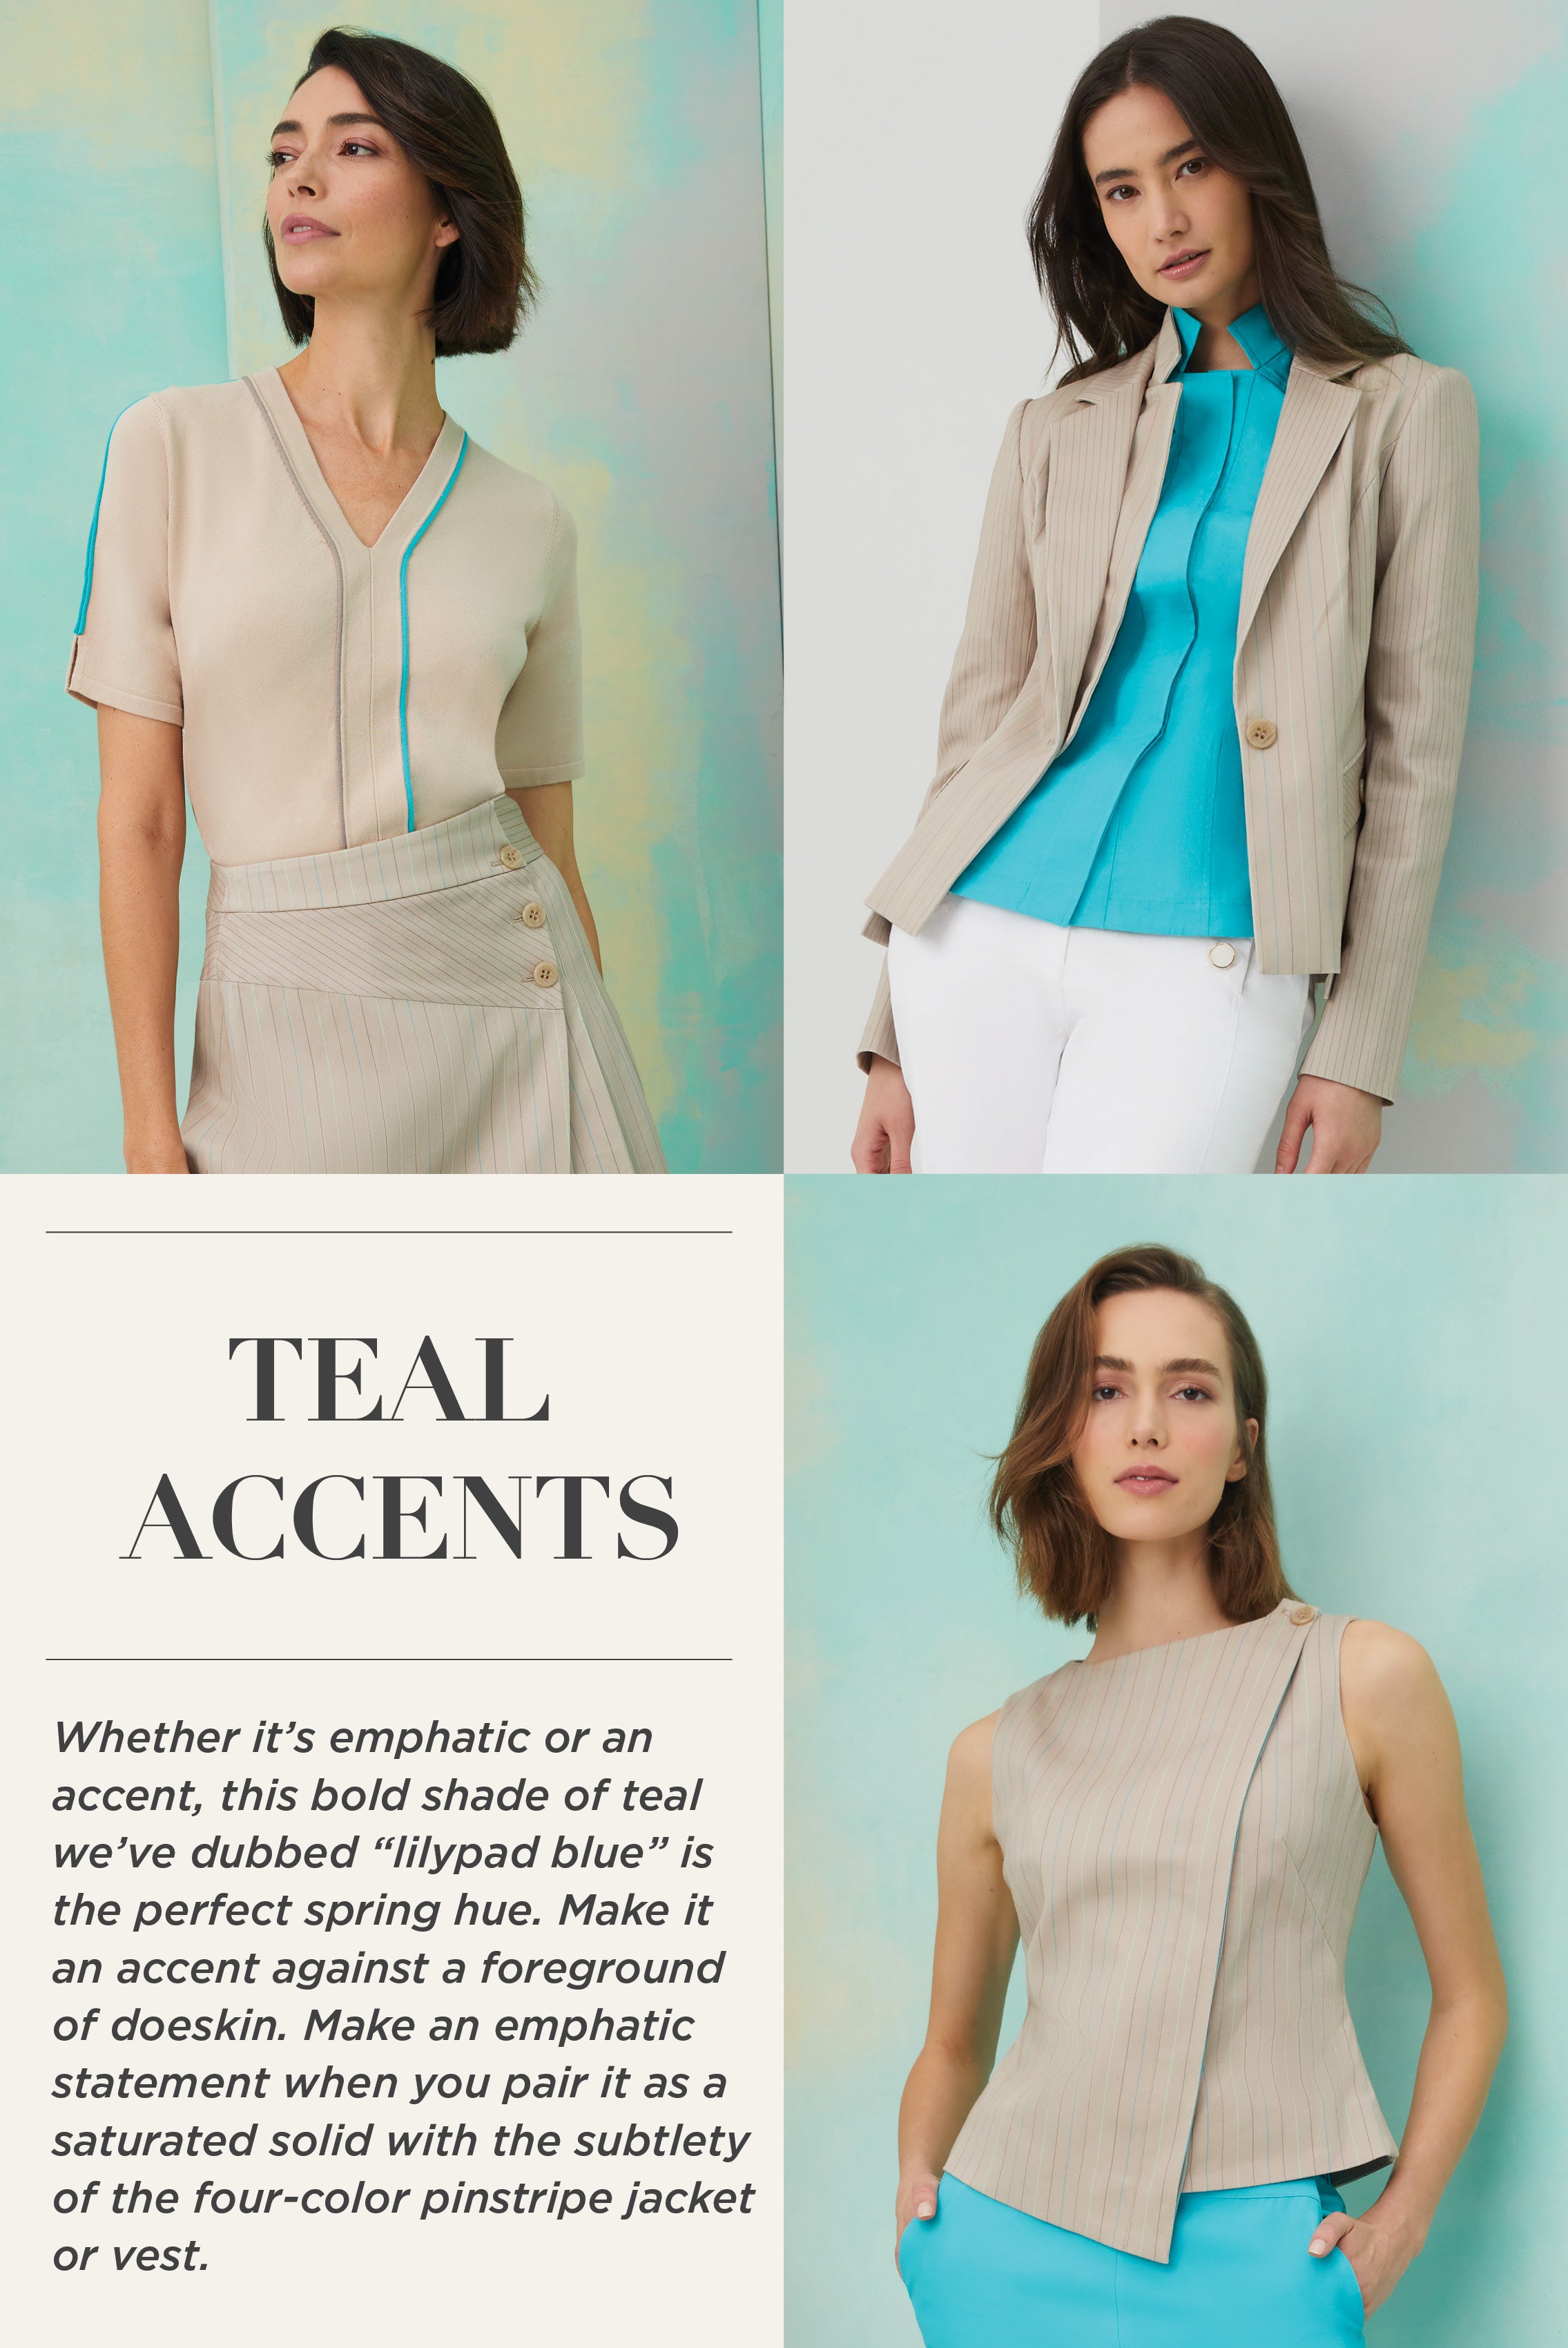 Spring catalog in Teal Accents section of model wearing Pont Neuf Skirt, Pont Neuf Jacket and Pont Neuf Skirt.